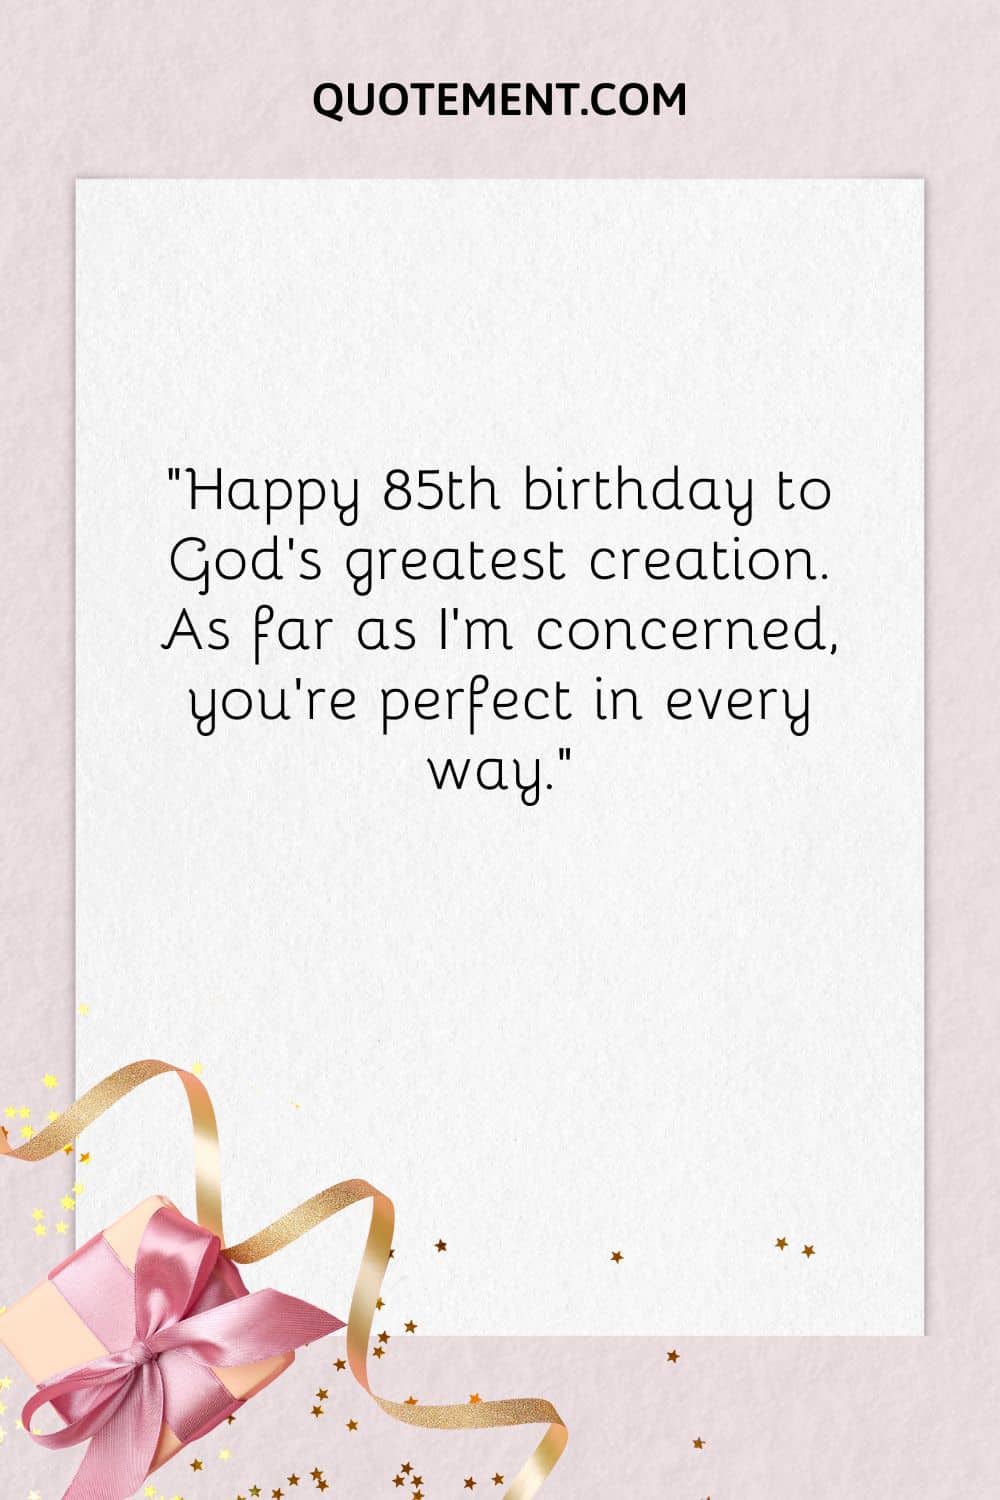 “Happy 85th birthday to God’s greatest creation. As far as I’m concerned, you’re perfect in every way.”